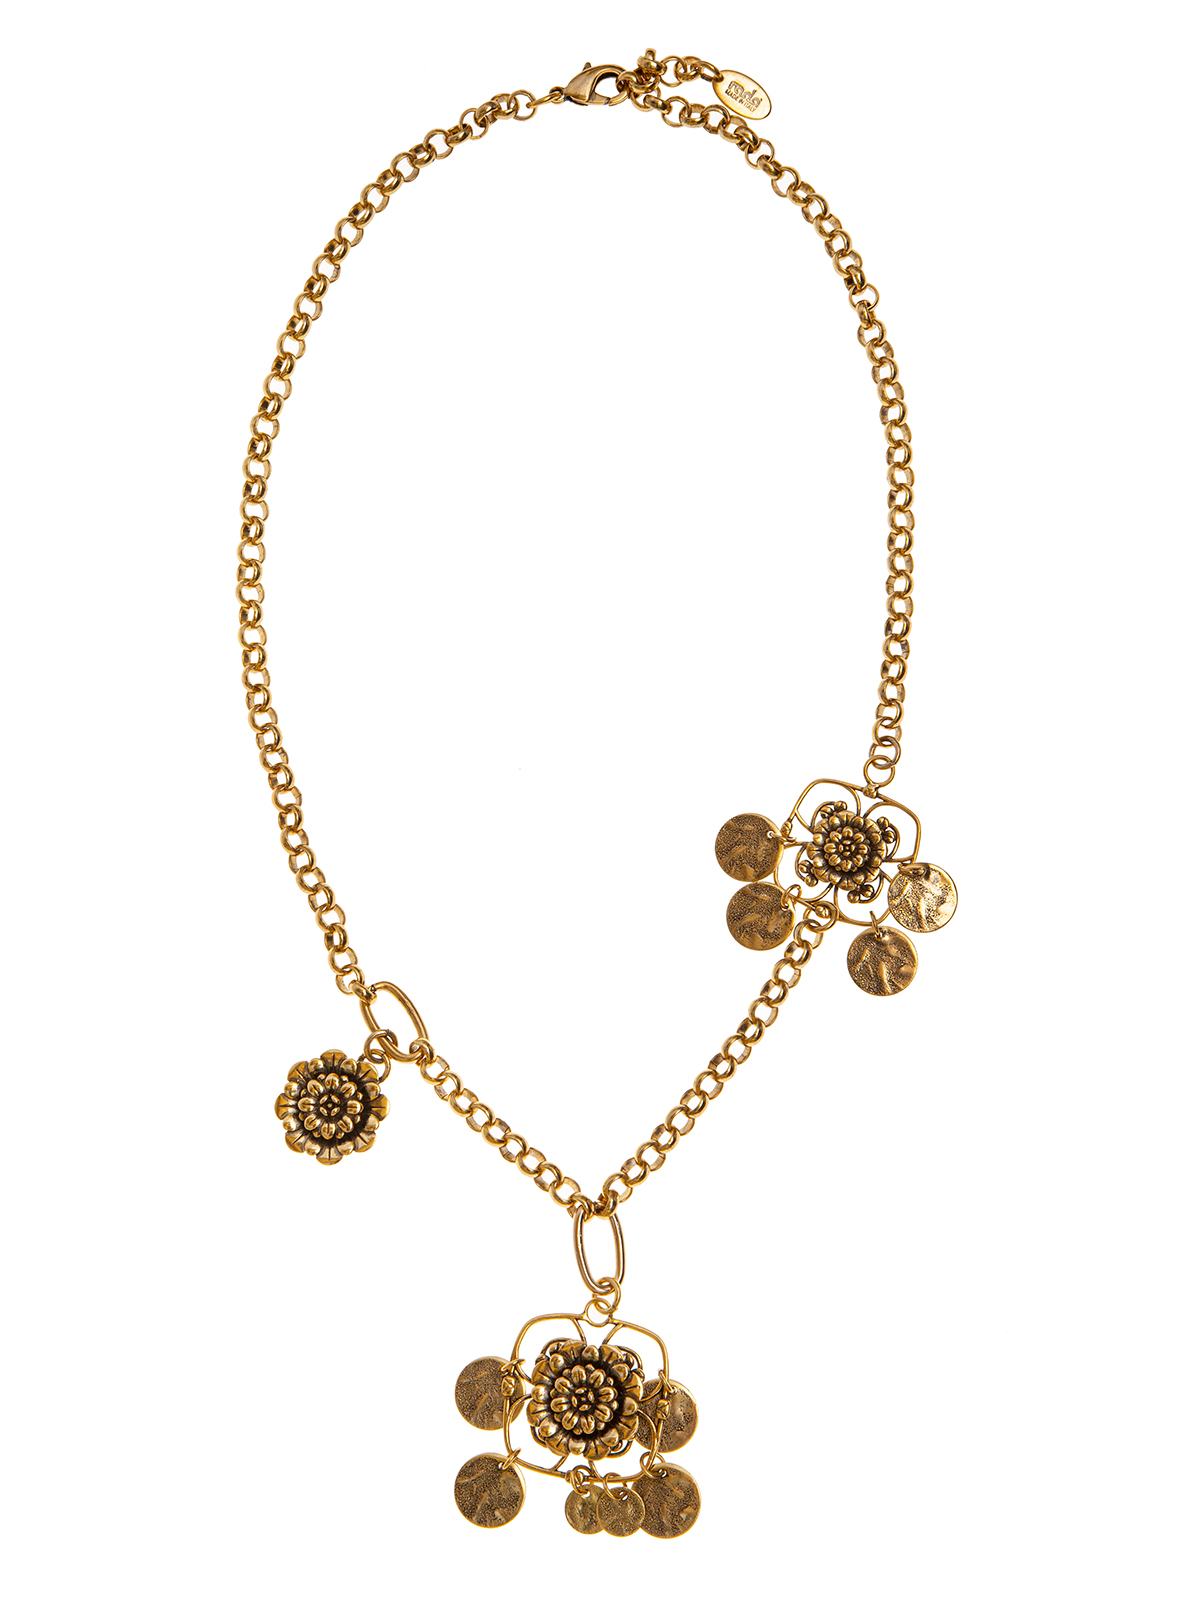 Chain necklace with filigrees and metal flowers